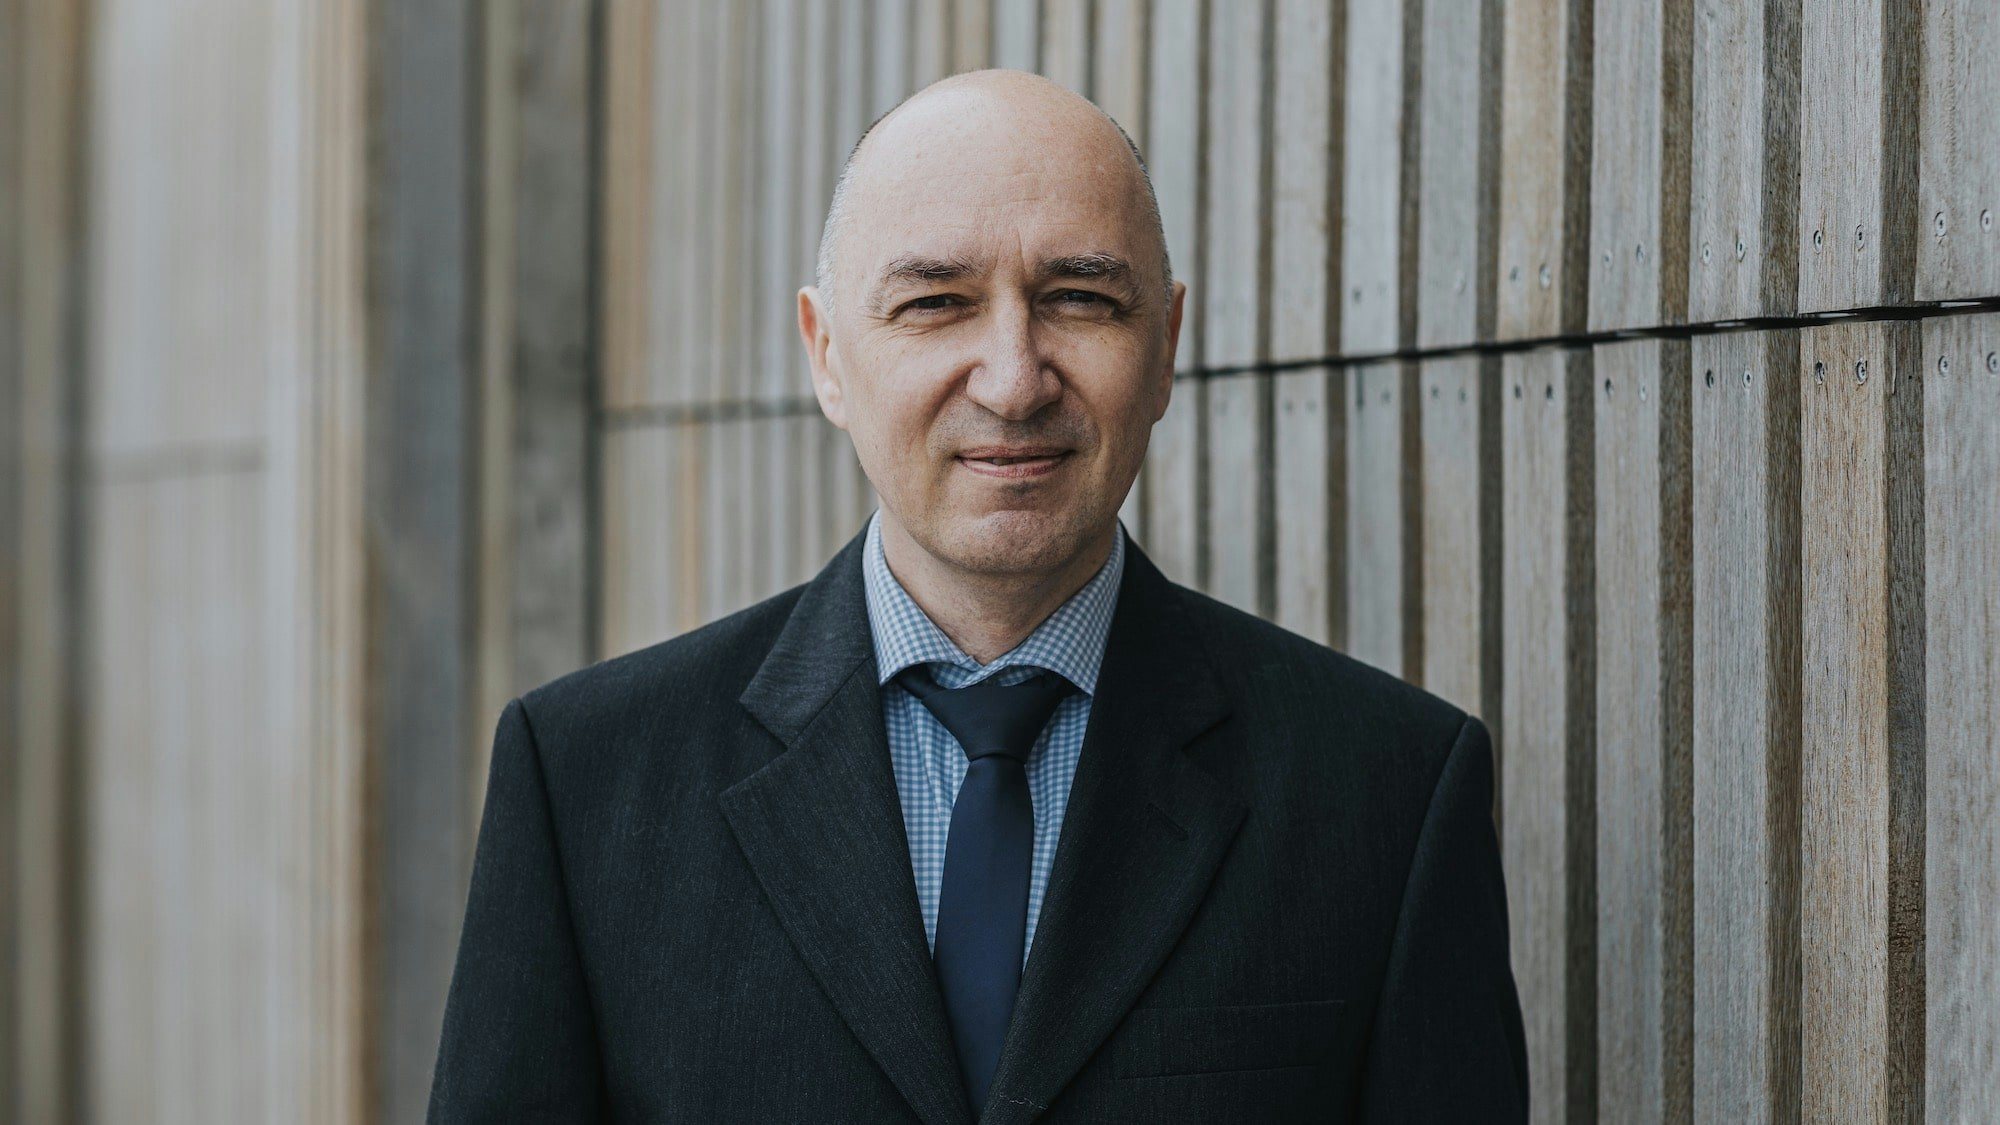 A man without hair in a dark suit in front of a wooden wall.